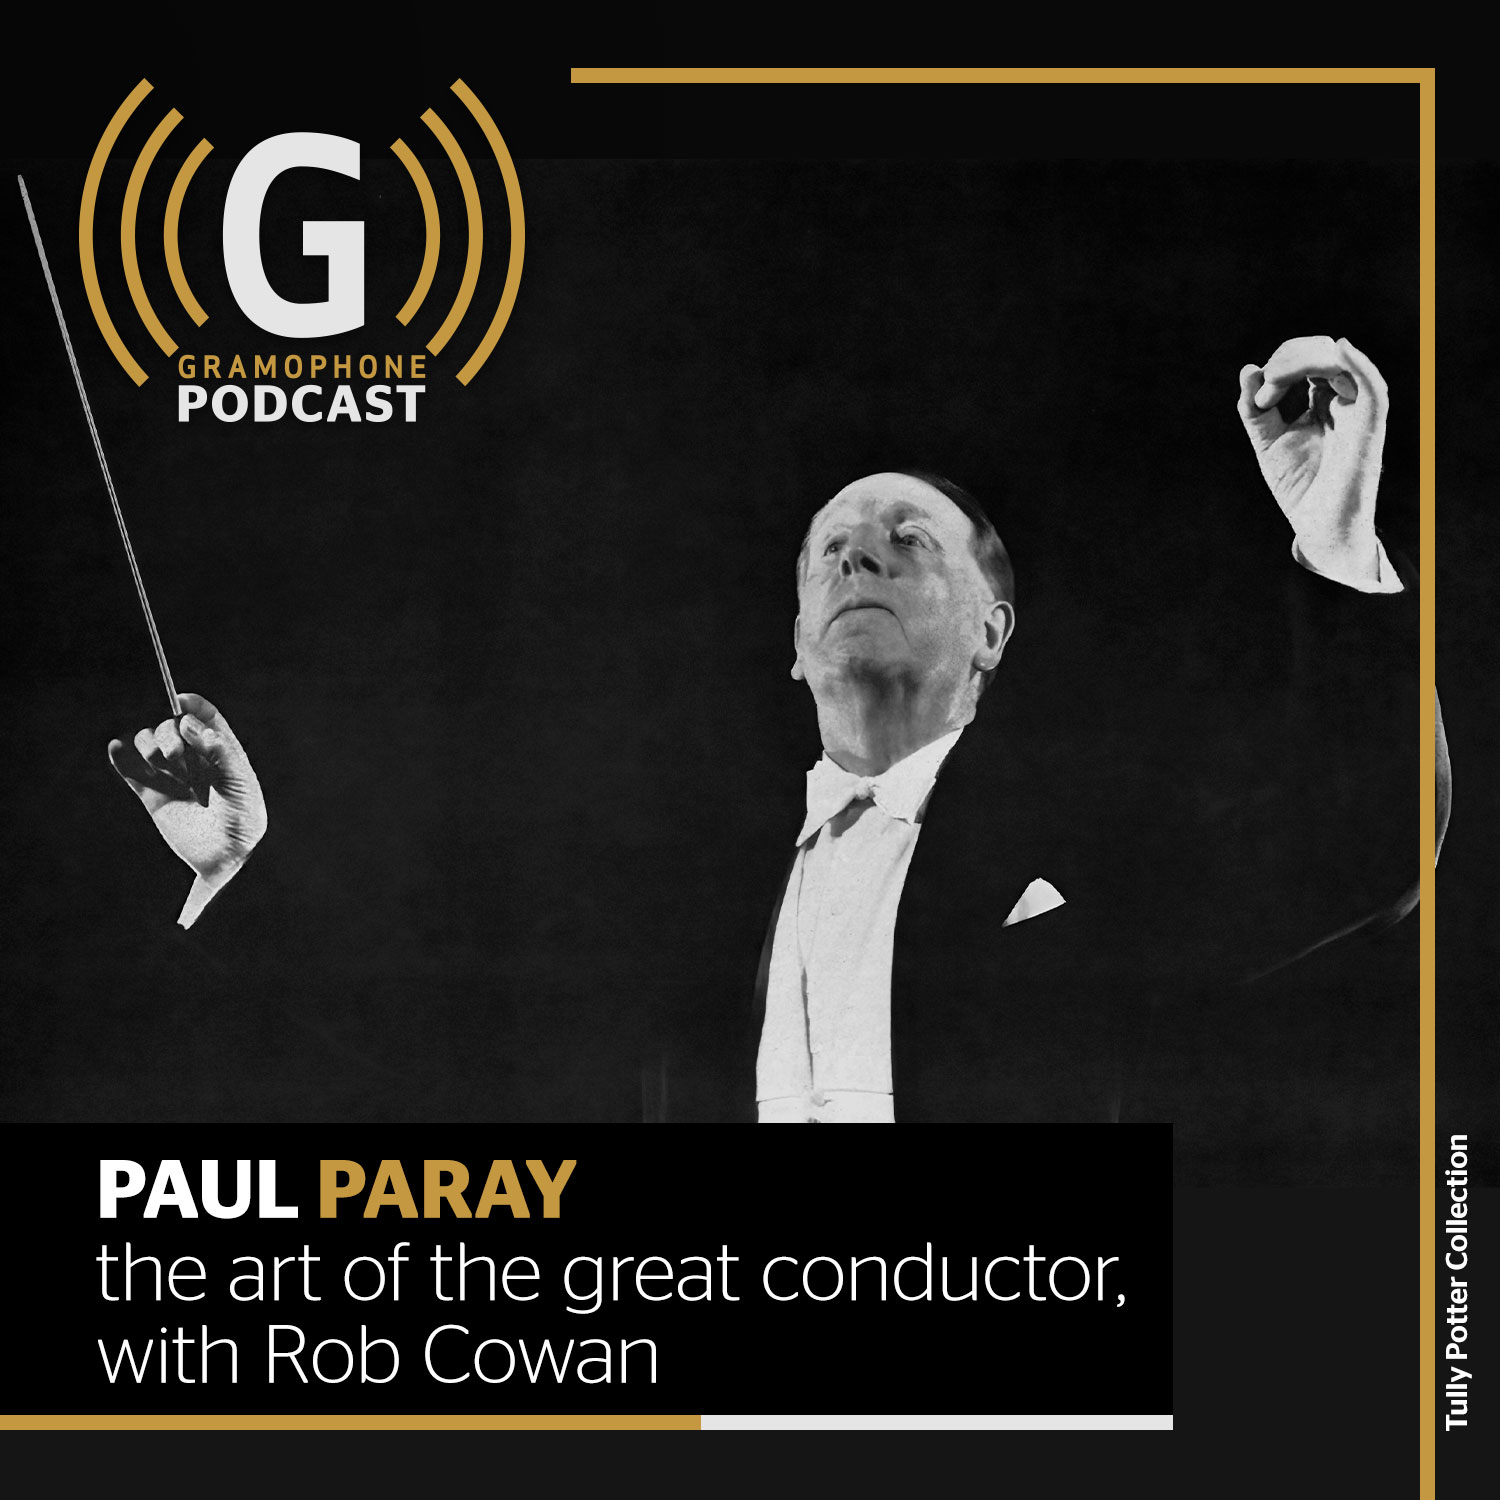 Paul Paray: The art of the great conductor | Gramophone